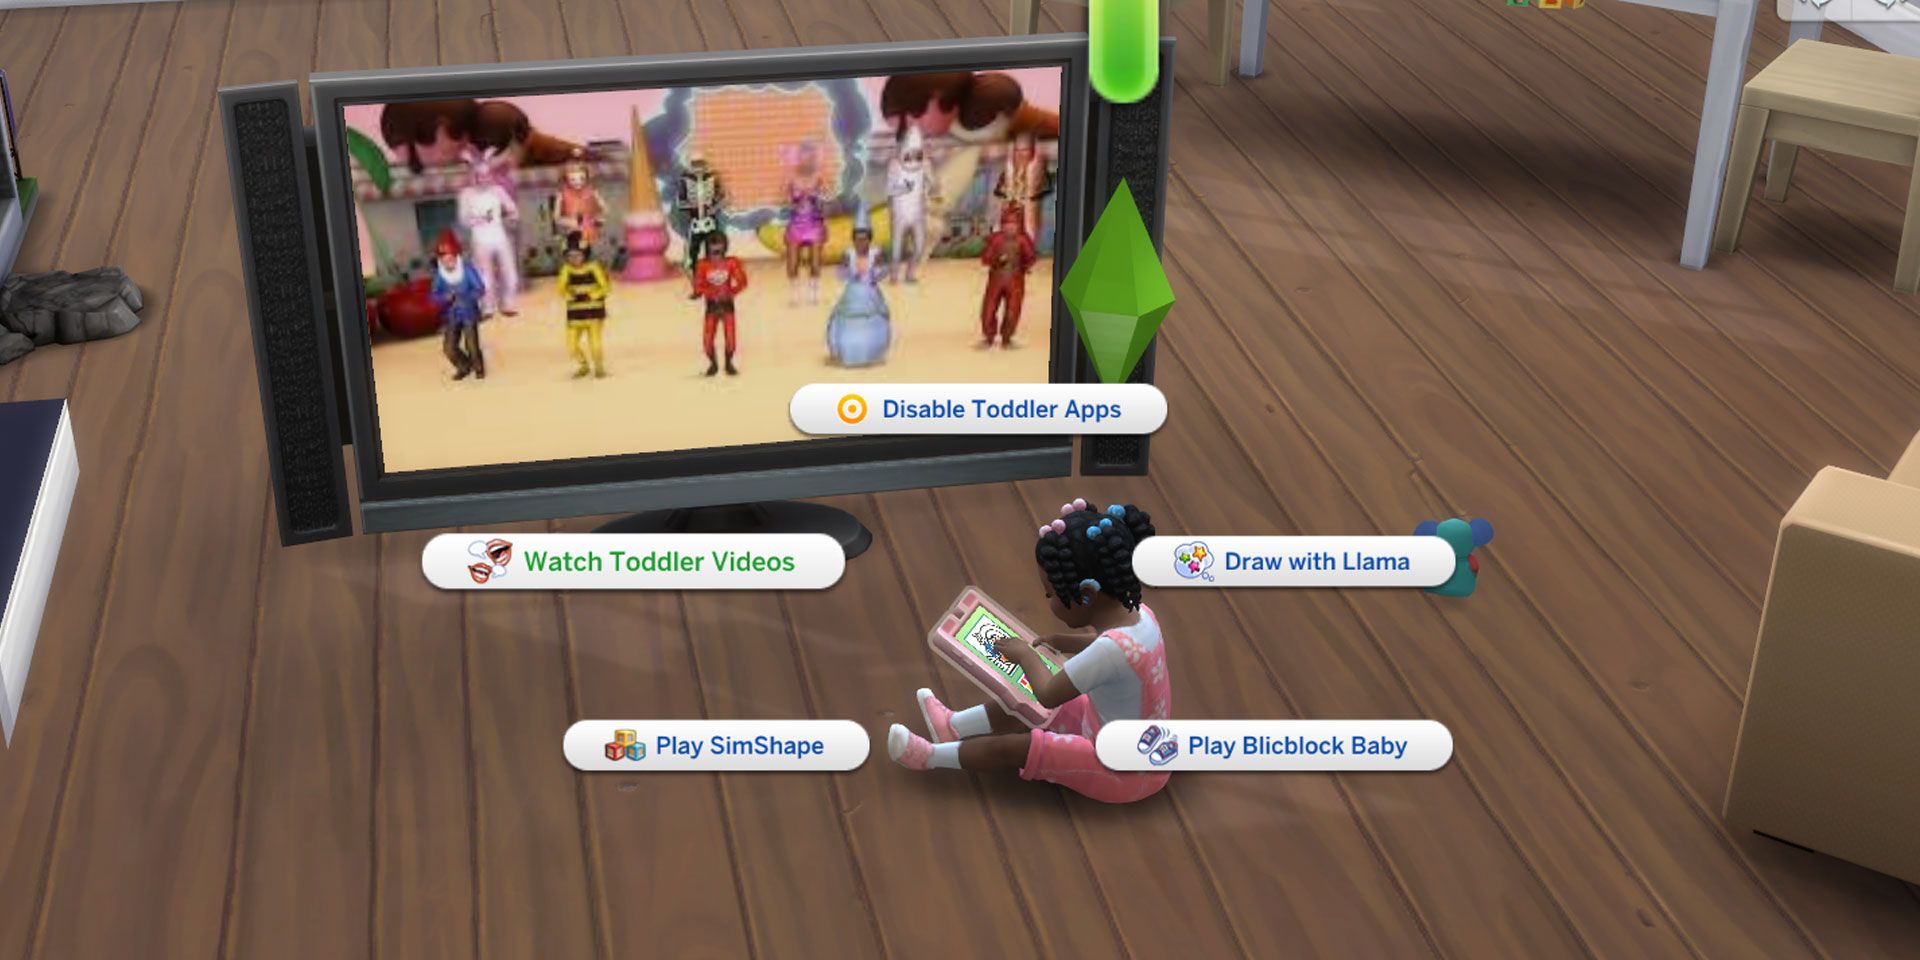 A toddler Sim using the Wabbit Tablet, the option to Watch Toddler Videos is selected.